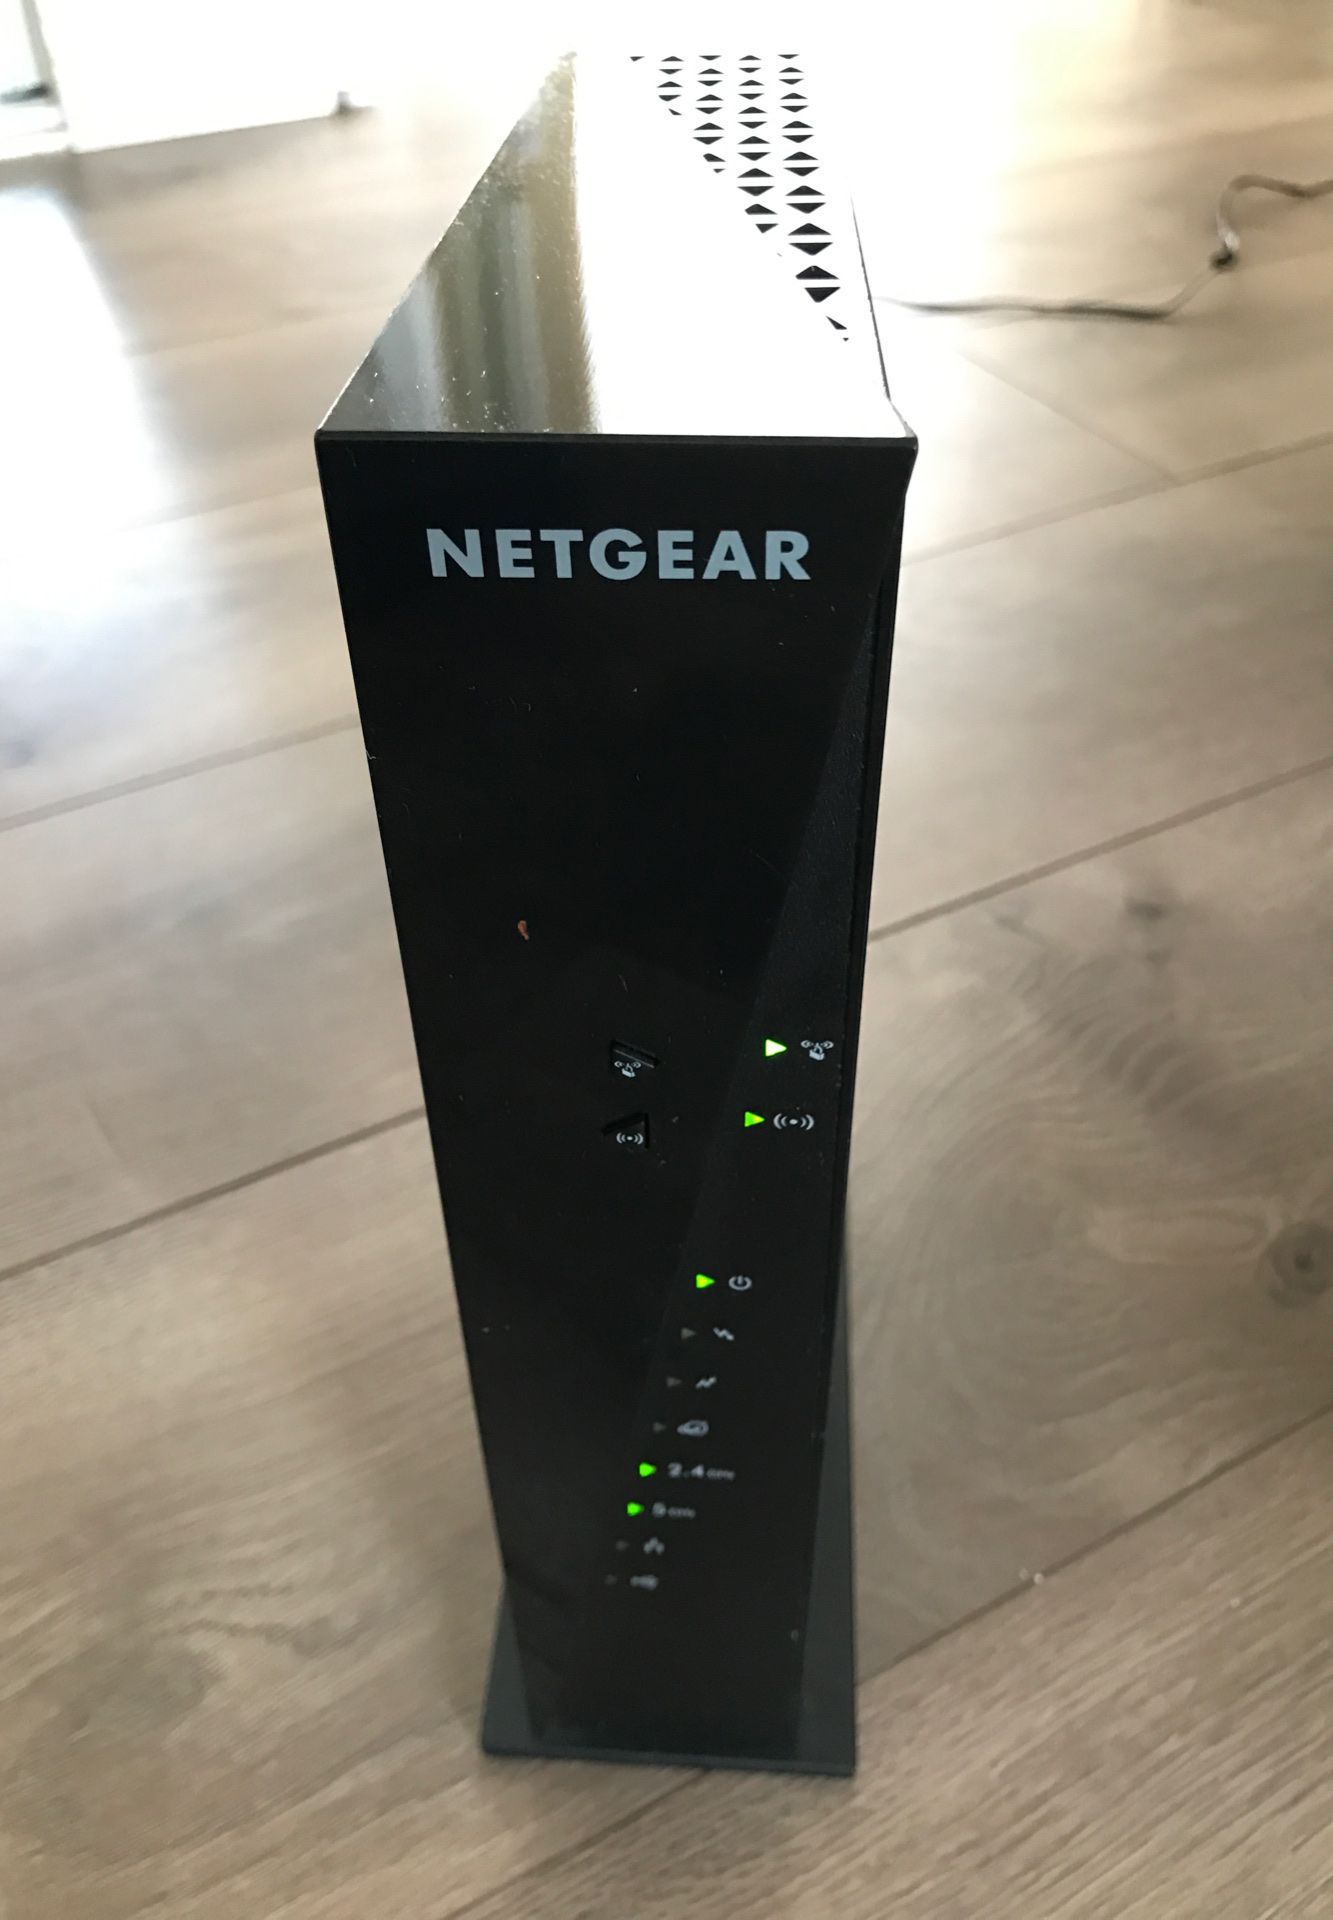 NETGEAR Dual Band AC1750 Router with 16 x 4 DOCSIS 3.0